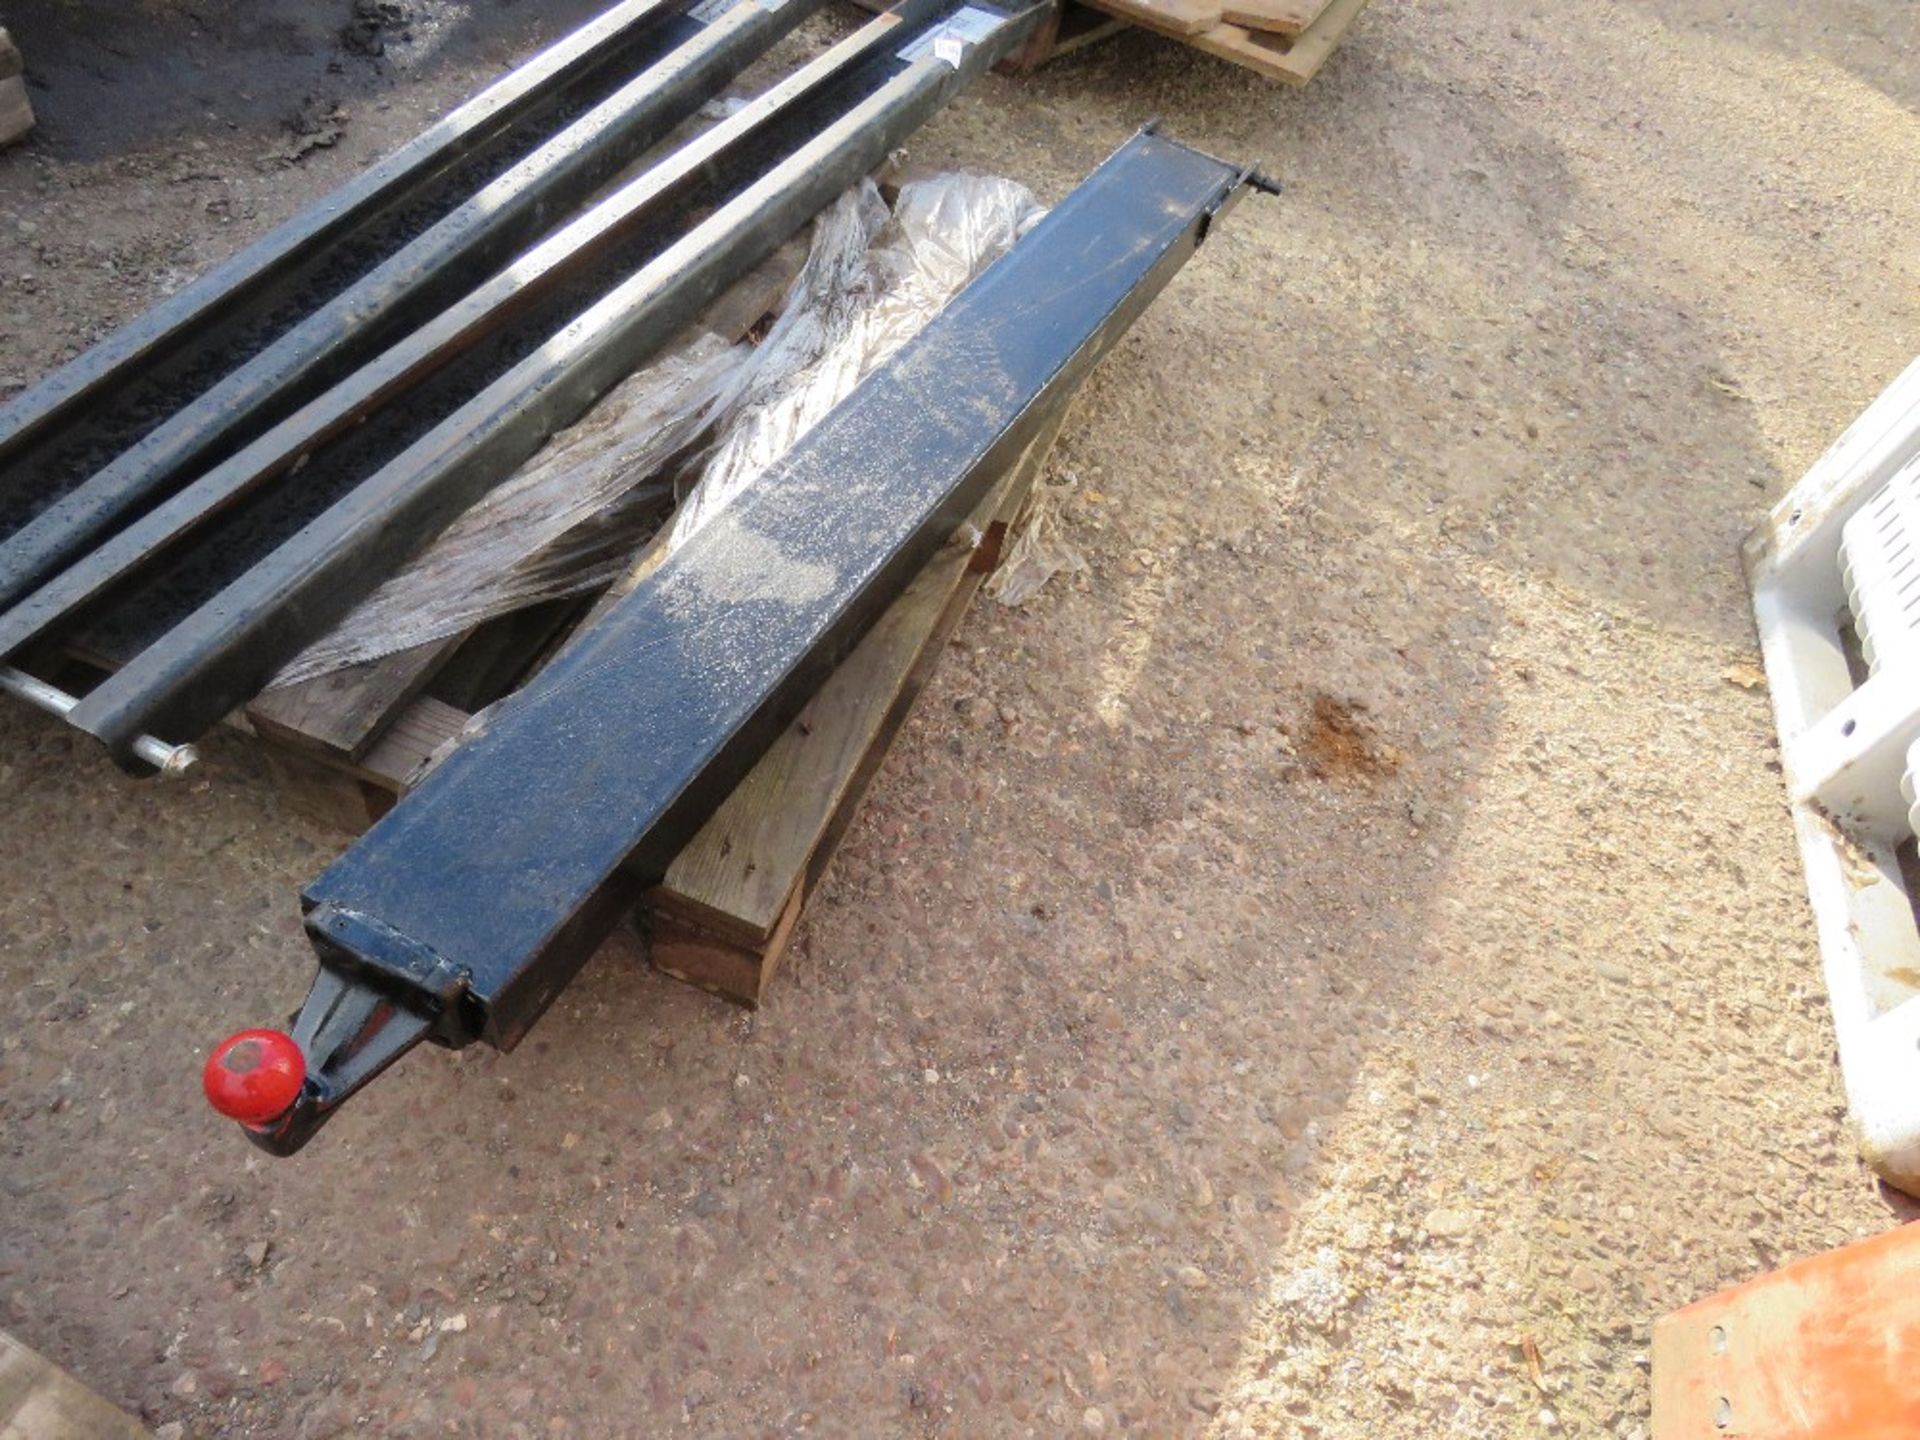 FORKLIFT TINE MOUNTED TRAILER TOW BALL ATTACHMENT, 1.6M LENGTH APPROX.